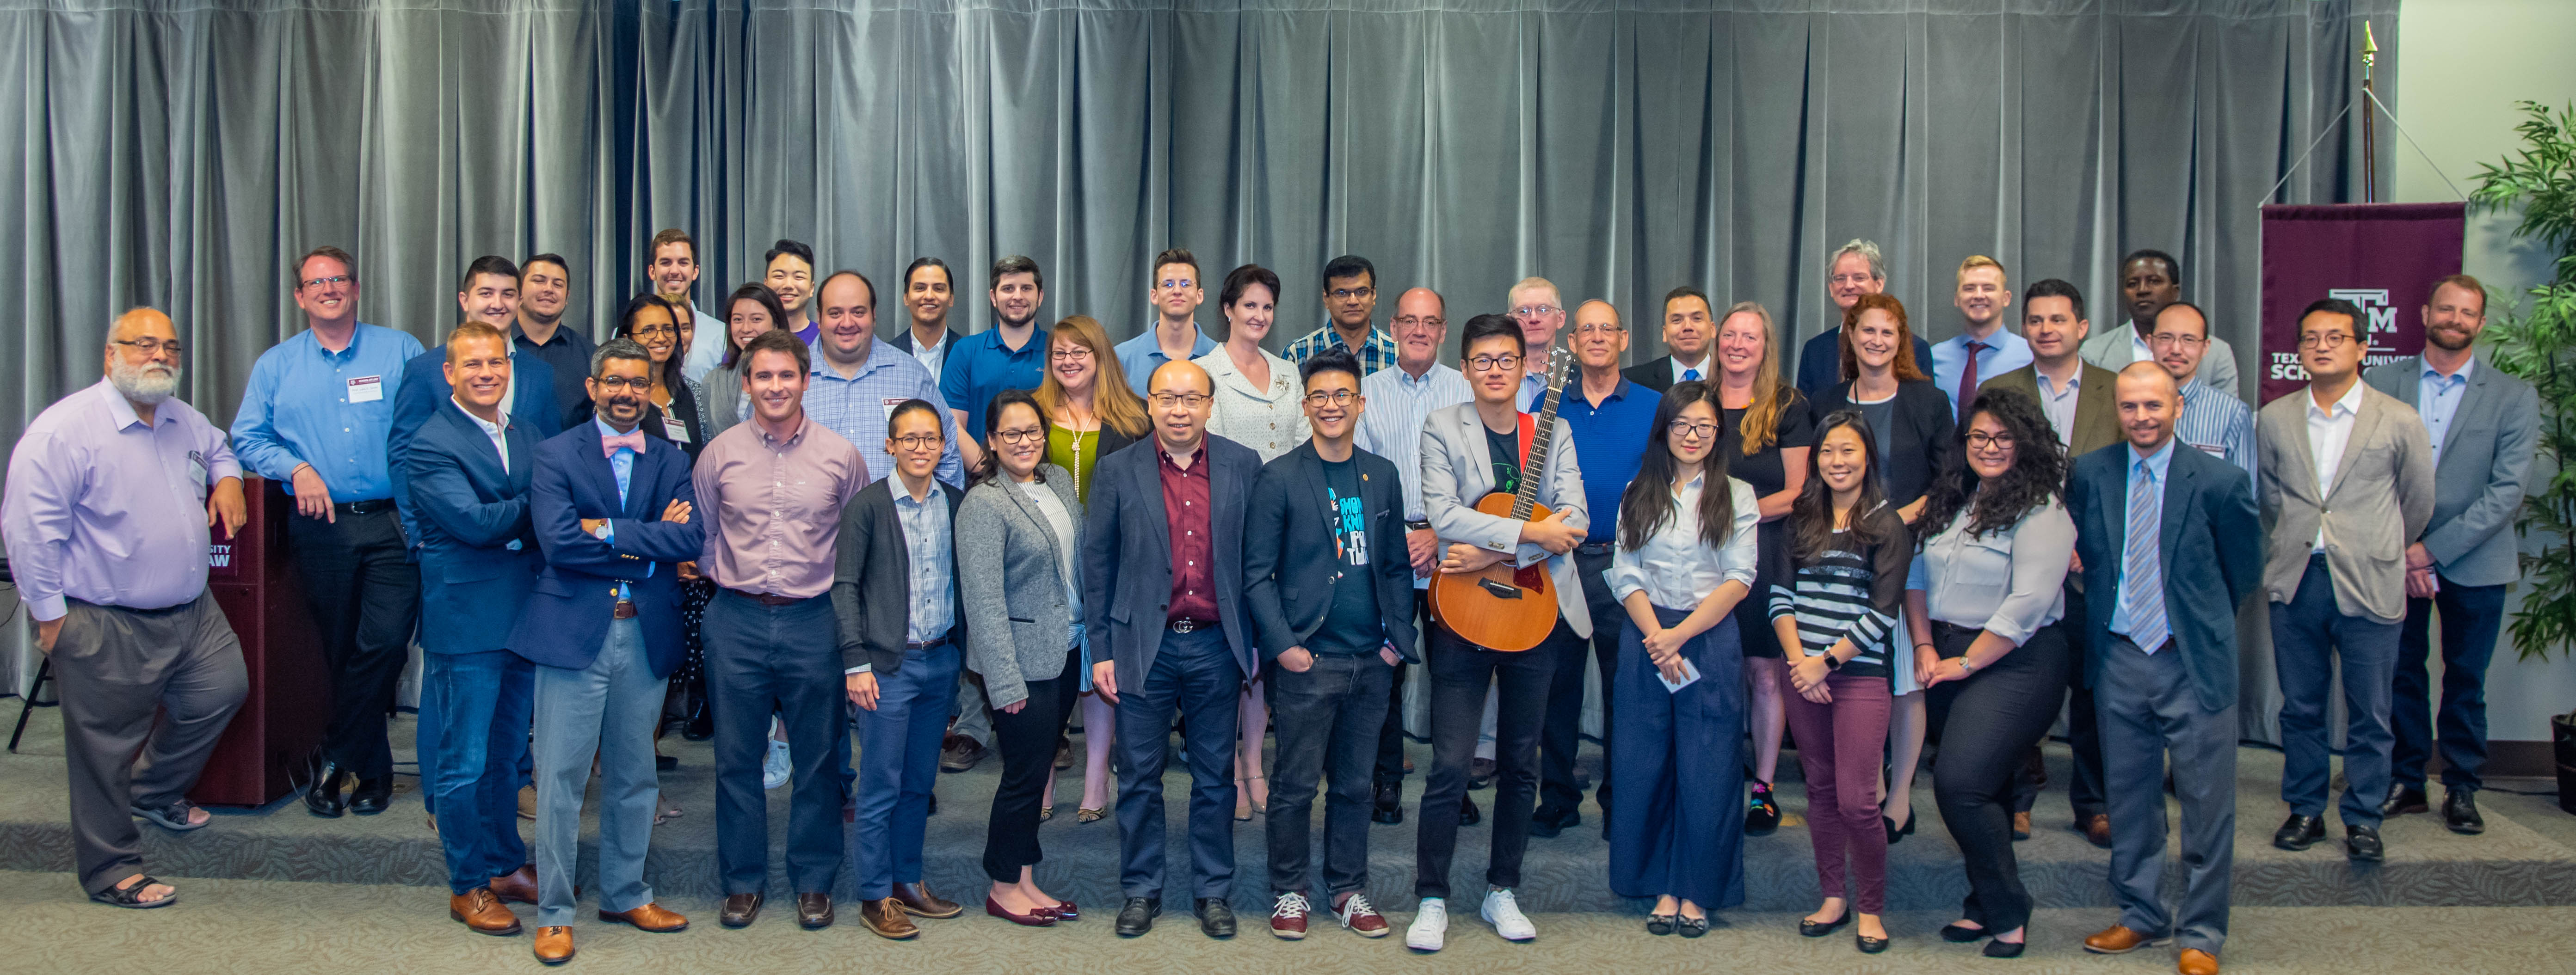 IP Roundtable 2019 group photo